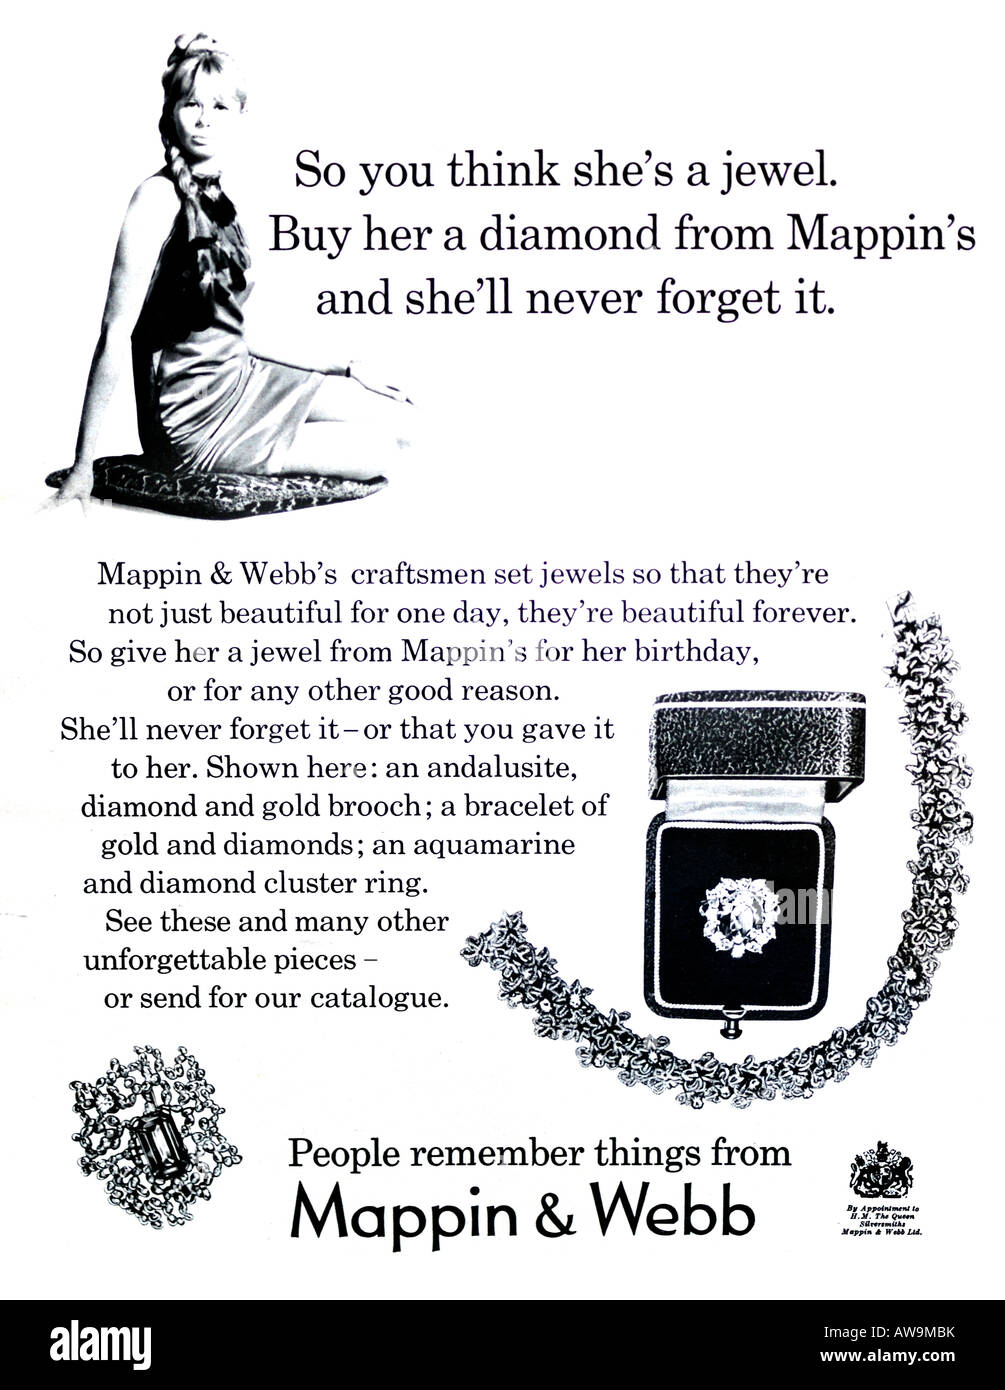 1960s Nova Magazine October 1968 Advertisement for Mappin & Webb Jewellery Jewelry Diamonds 1960s FOR EDITORIAL USE ONLY Stock Photo